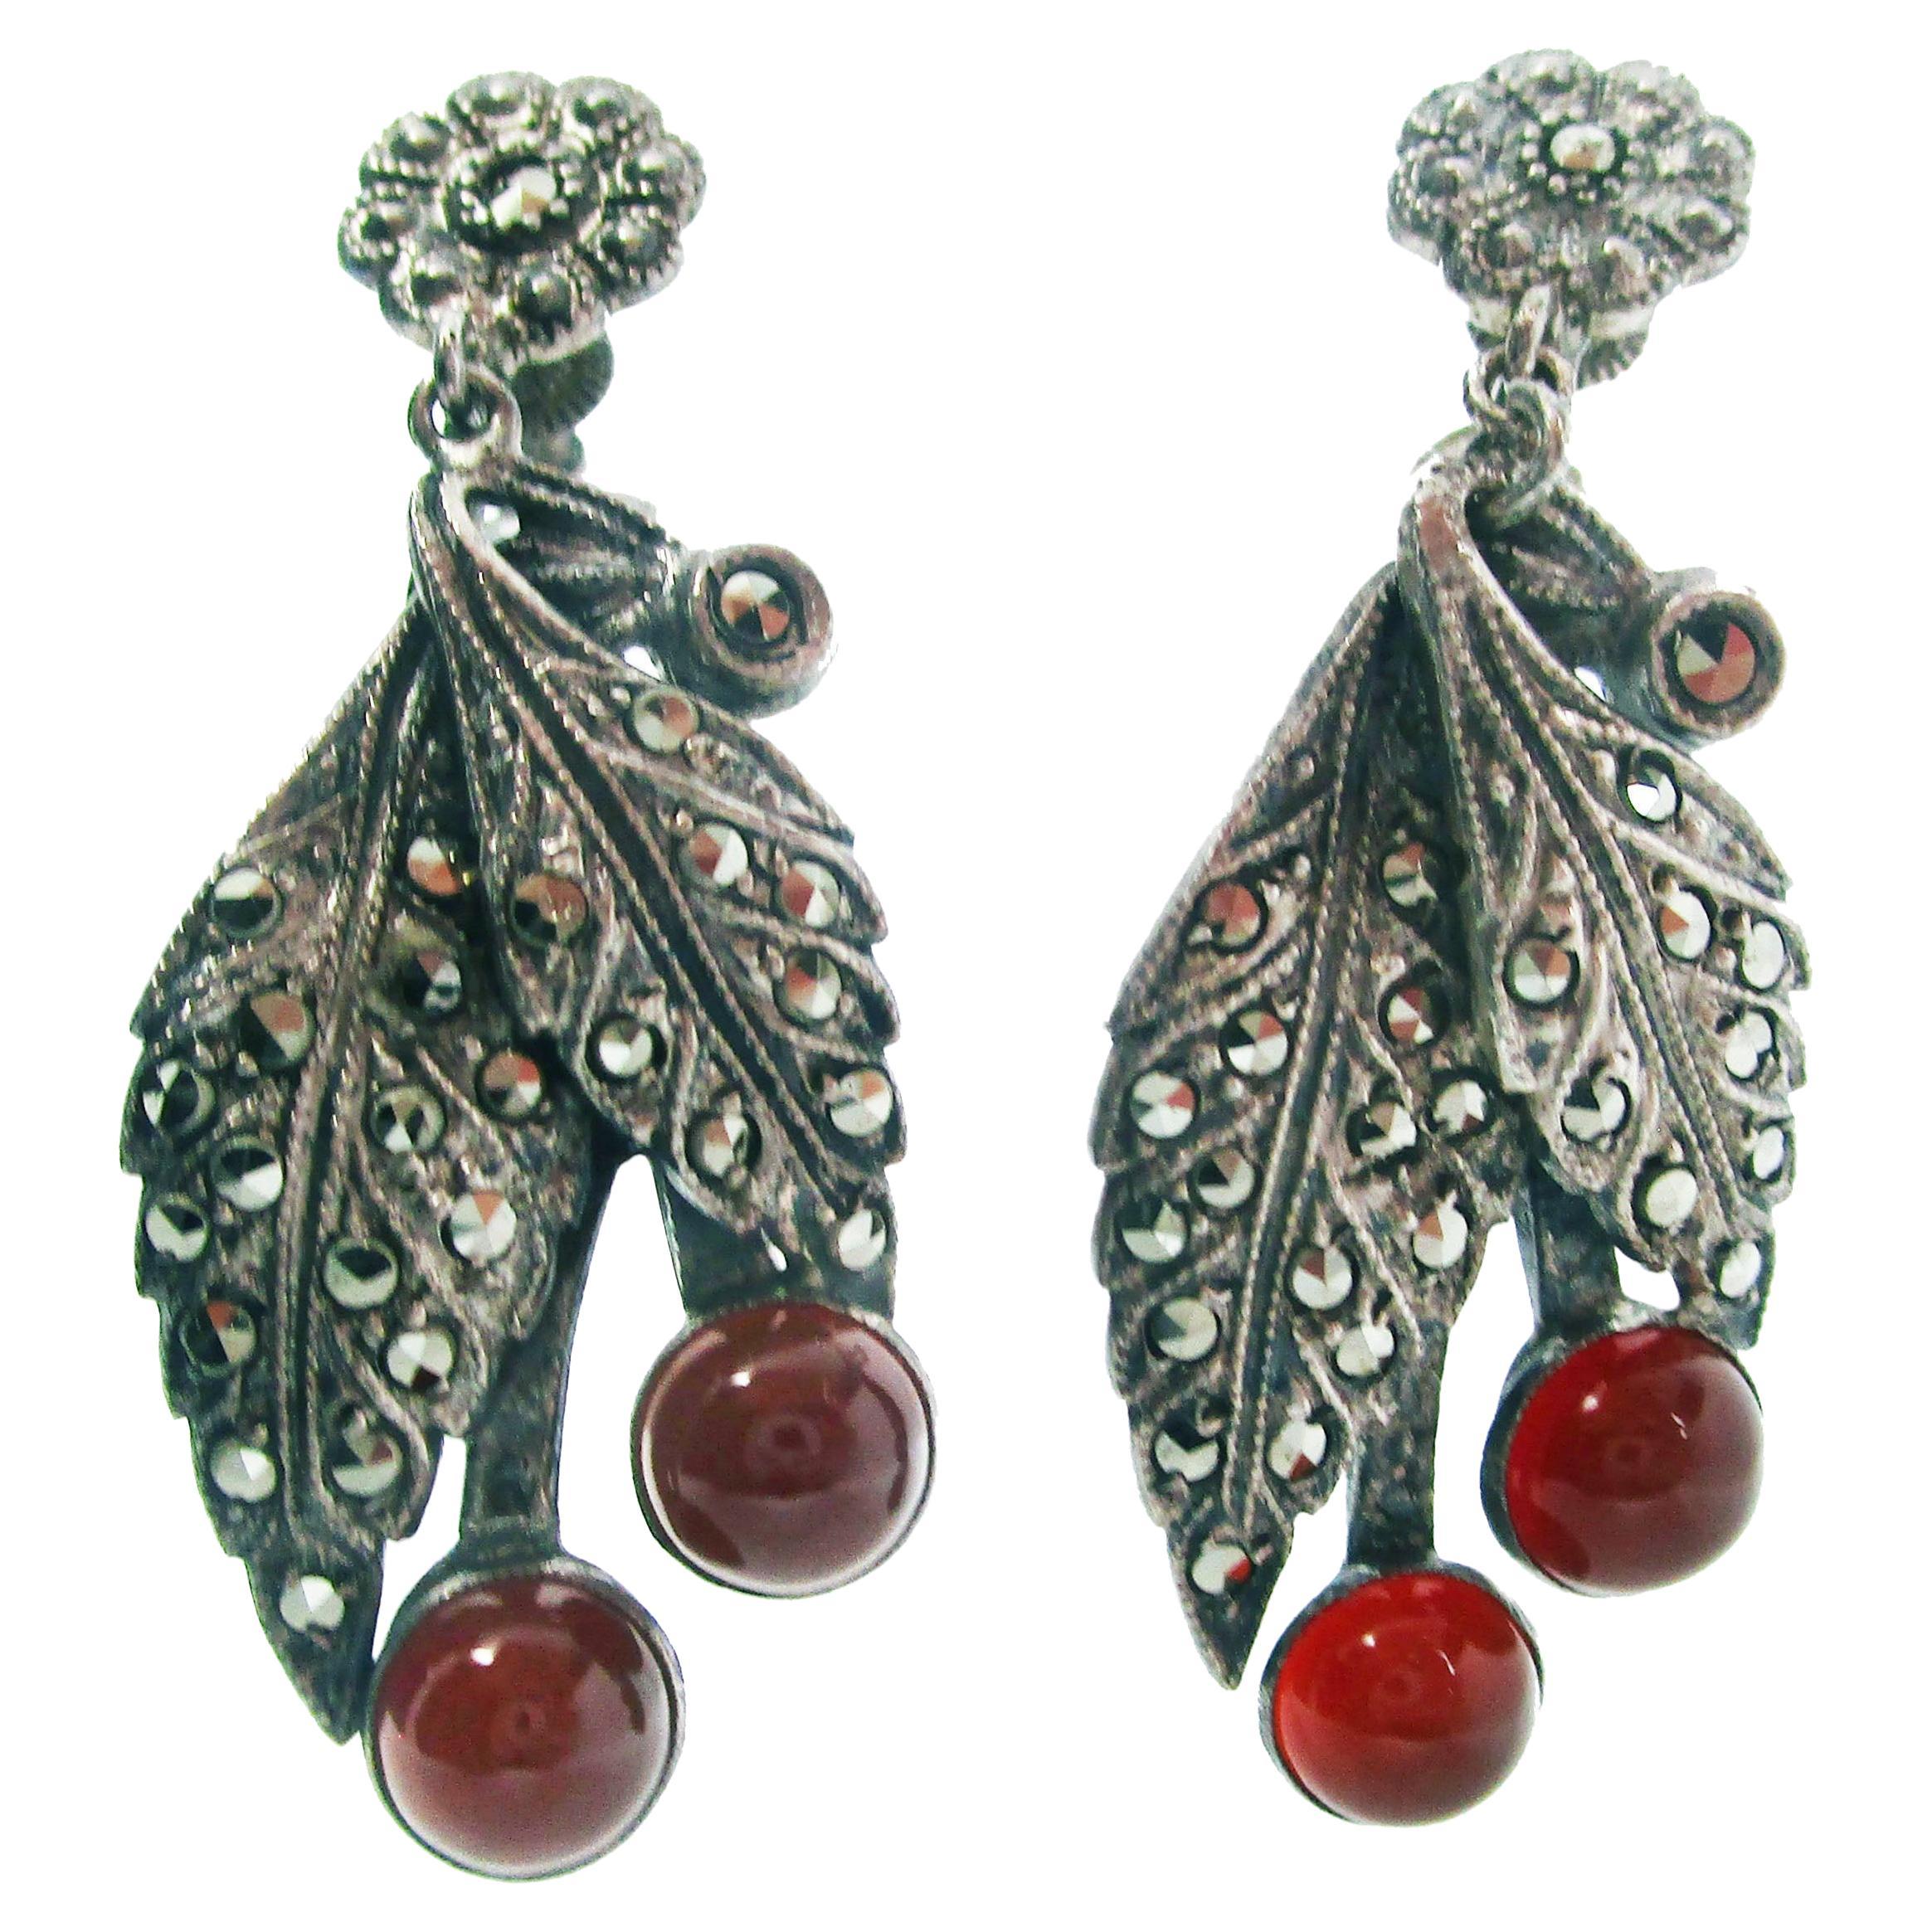 1925 Art Deco Sterling Silver Marcasite and Carnelian Cherry Earrings